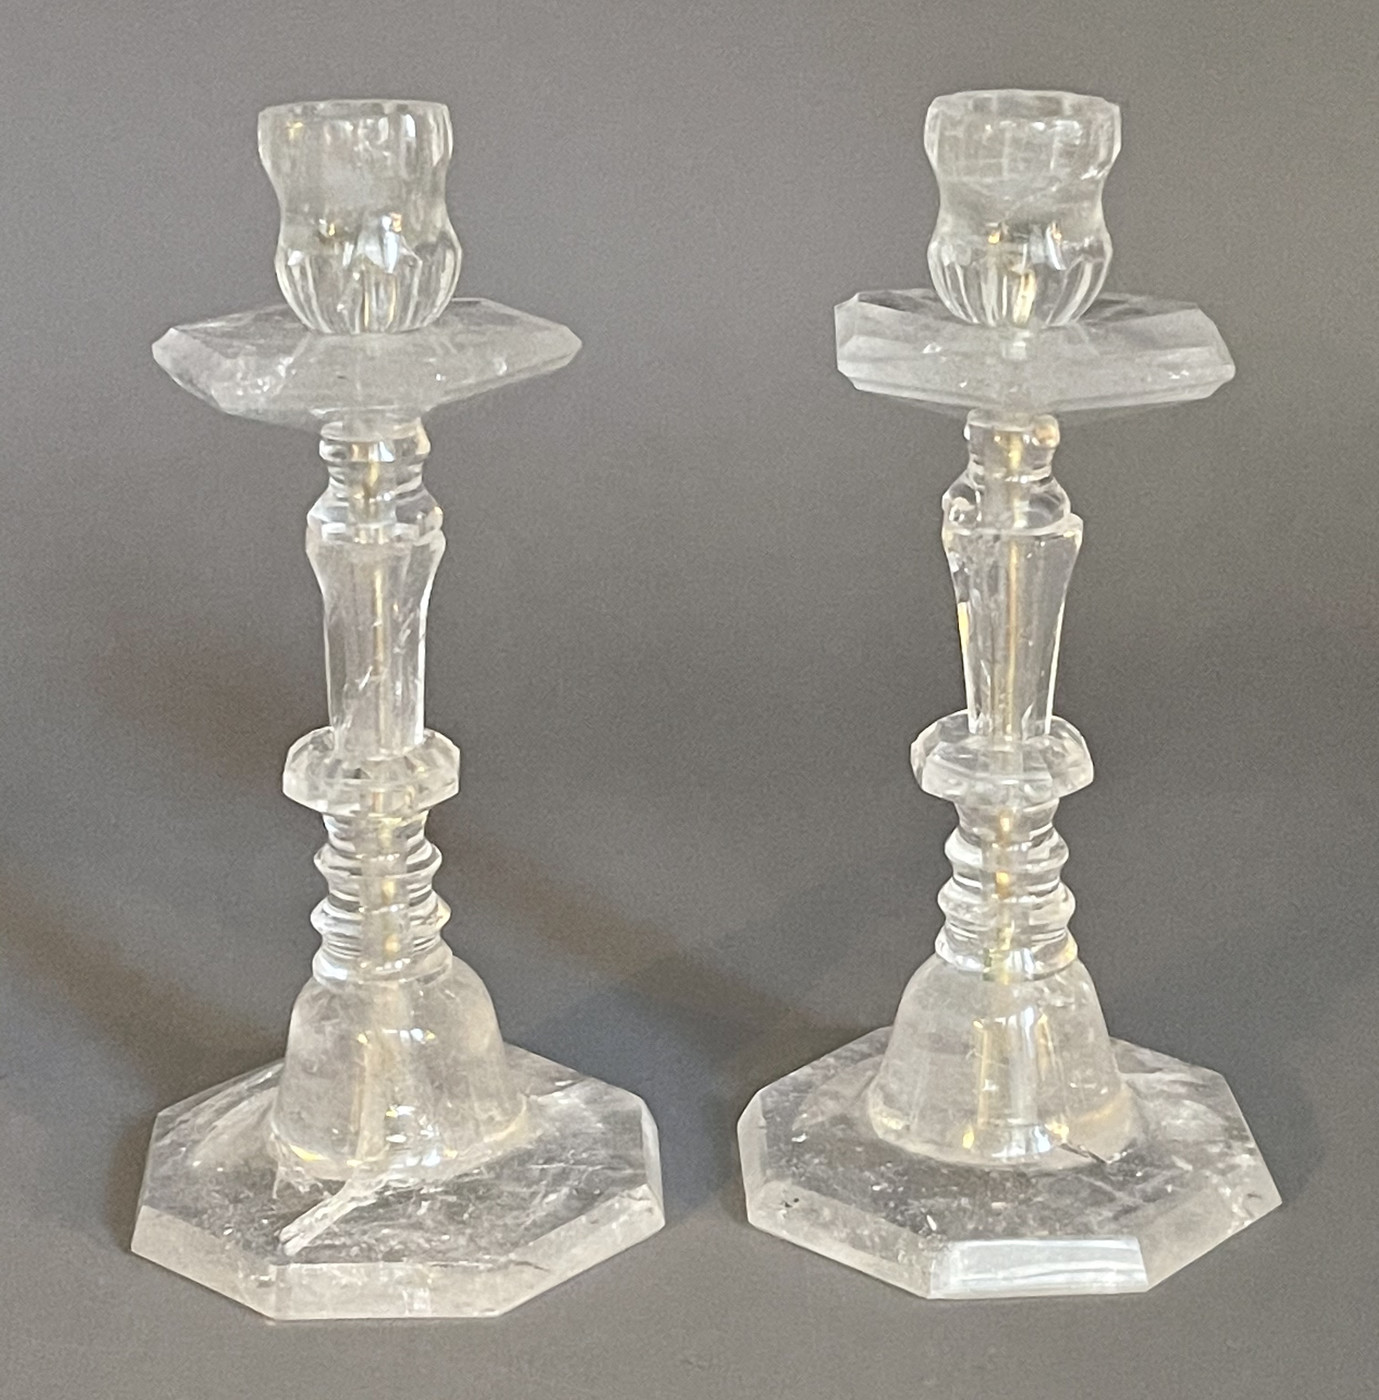 Pair of candlesticks in rock-crystal